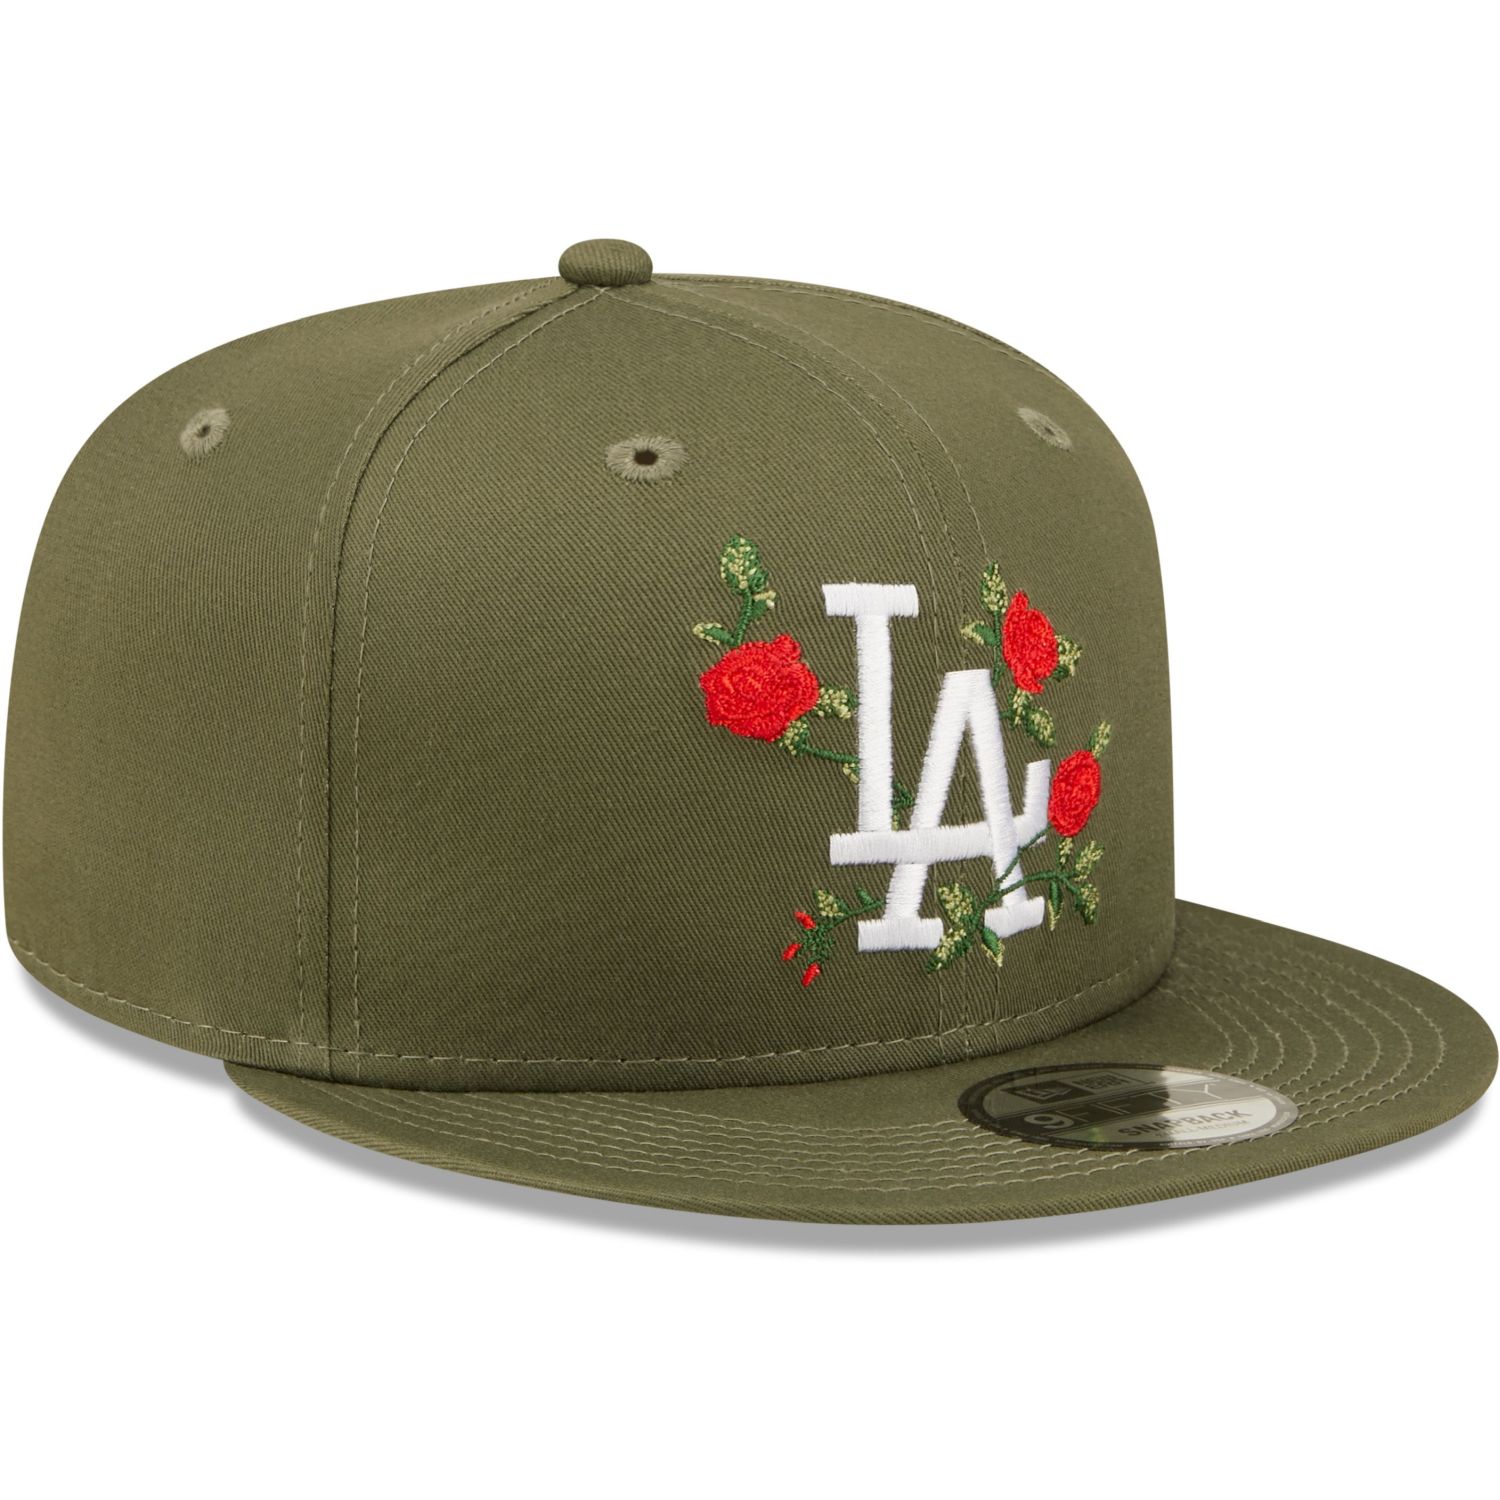 Los Angeles Dodgers White Floral 9Fifty New Era Fits Snapback Hat